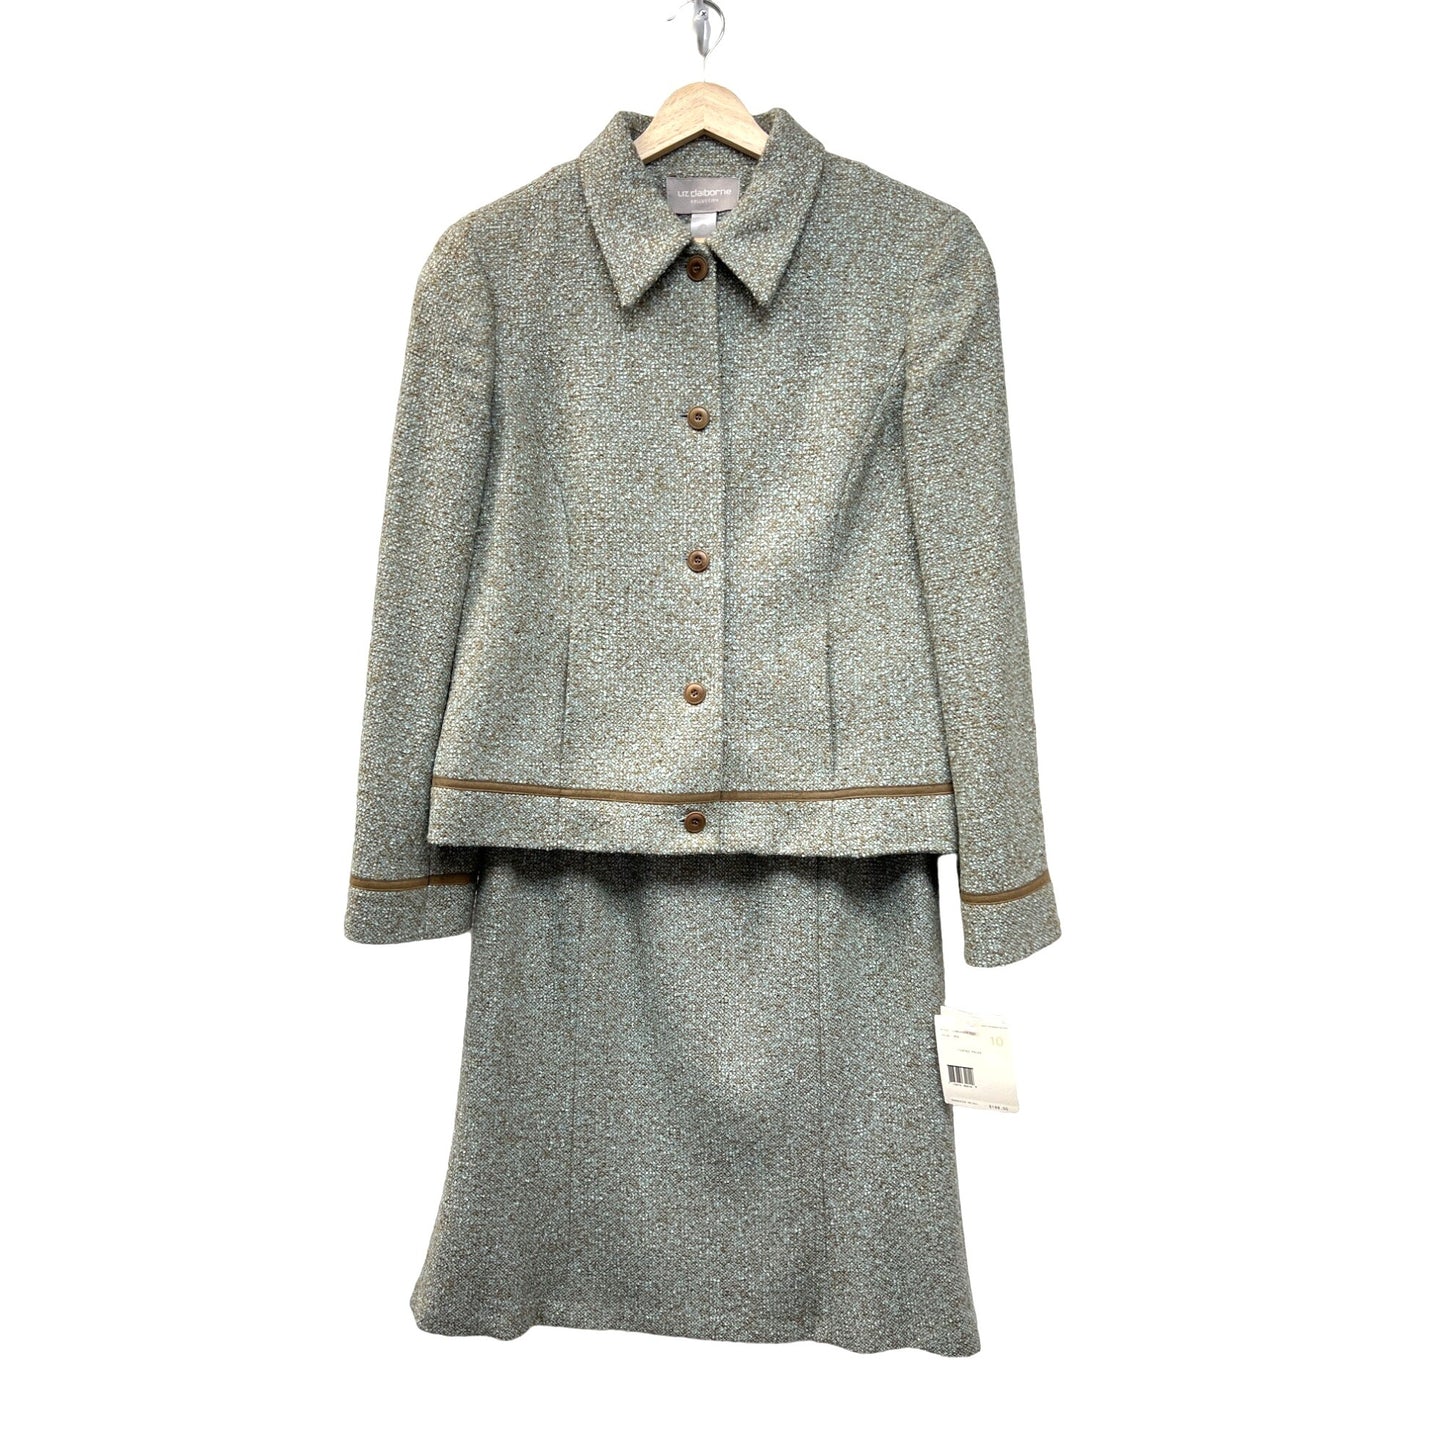 Liz Claiborne Collection NWT Light Green and Light Brown Wool Tweed Skirt Suit Set